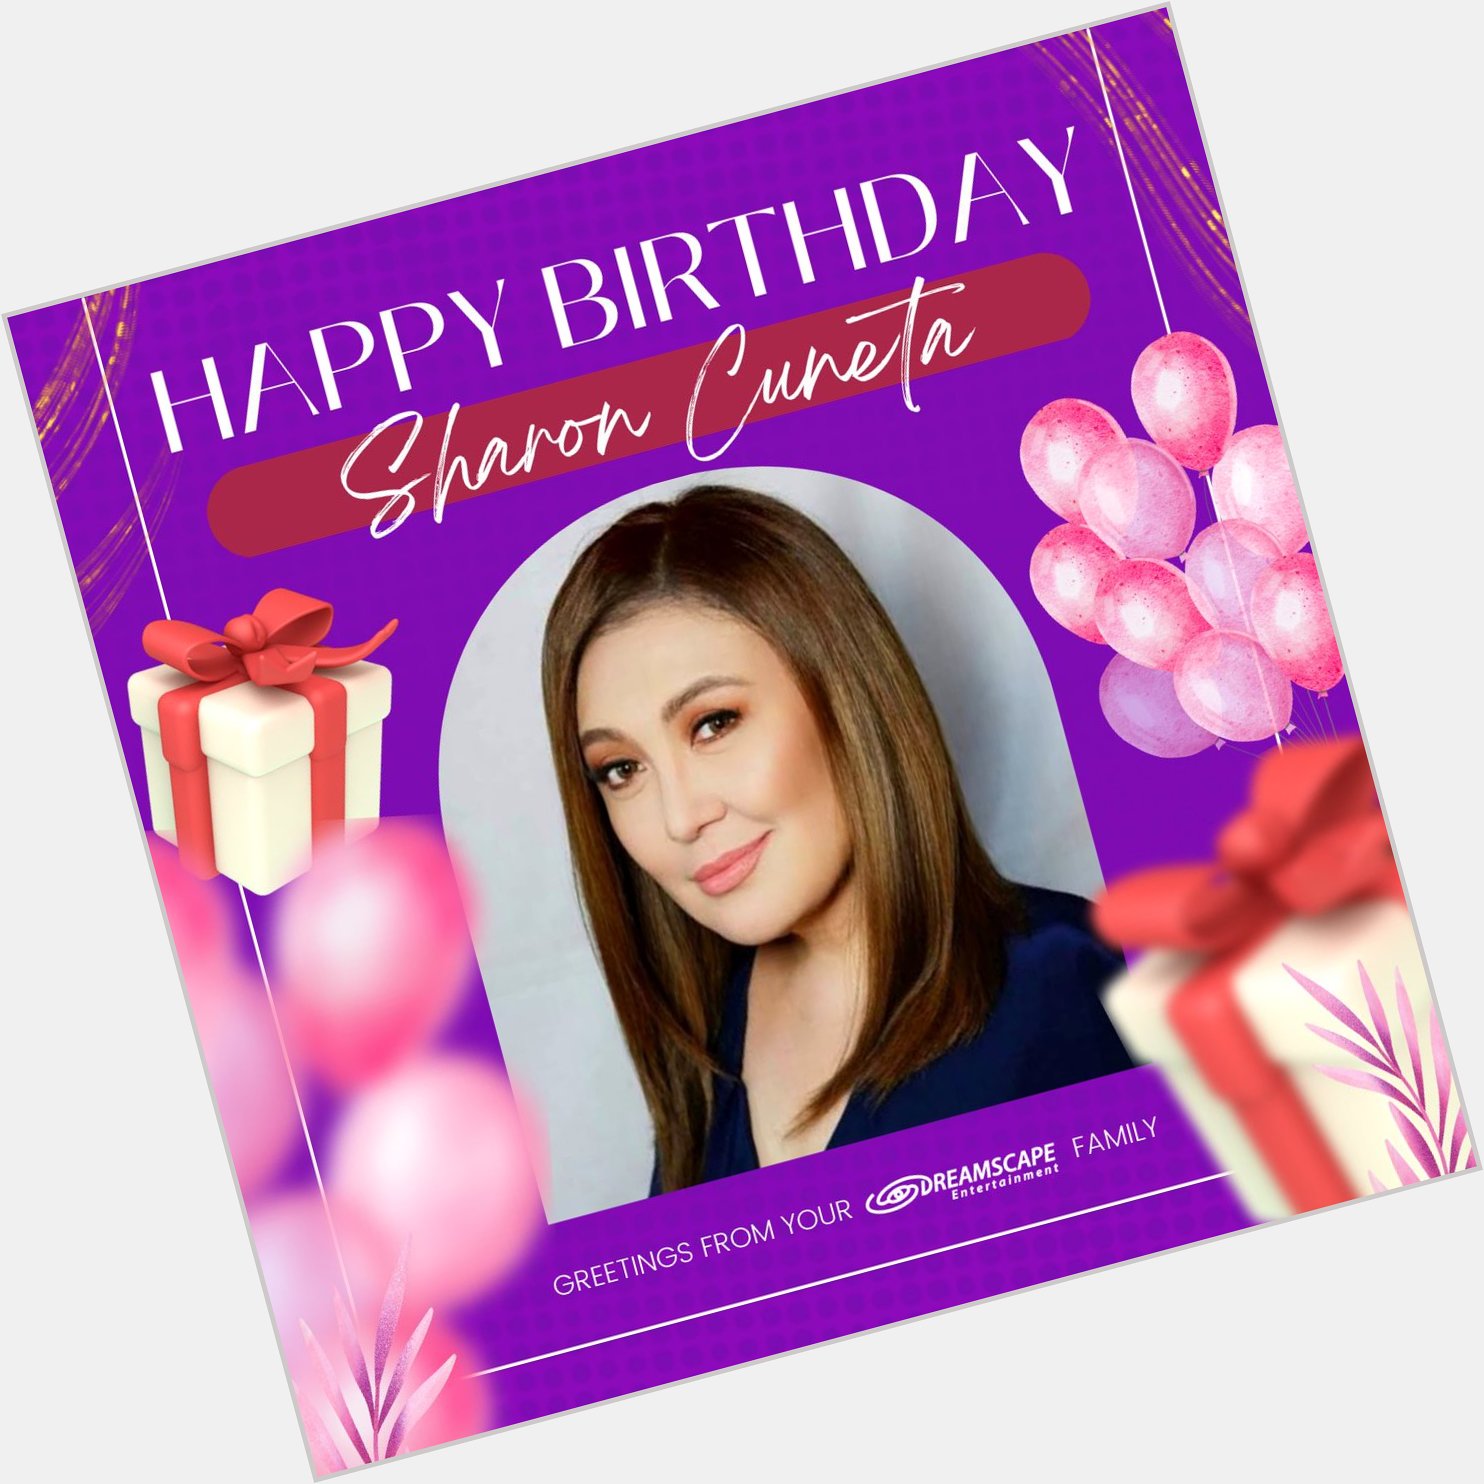 Happy Birthday Sharon Cuneta  Greetings from your Dreamscape family! 